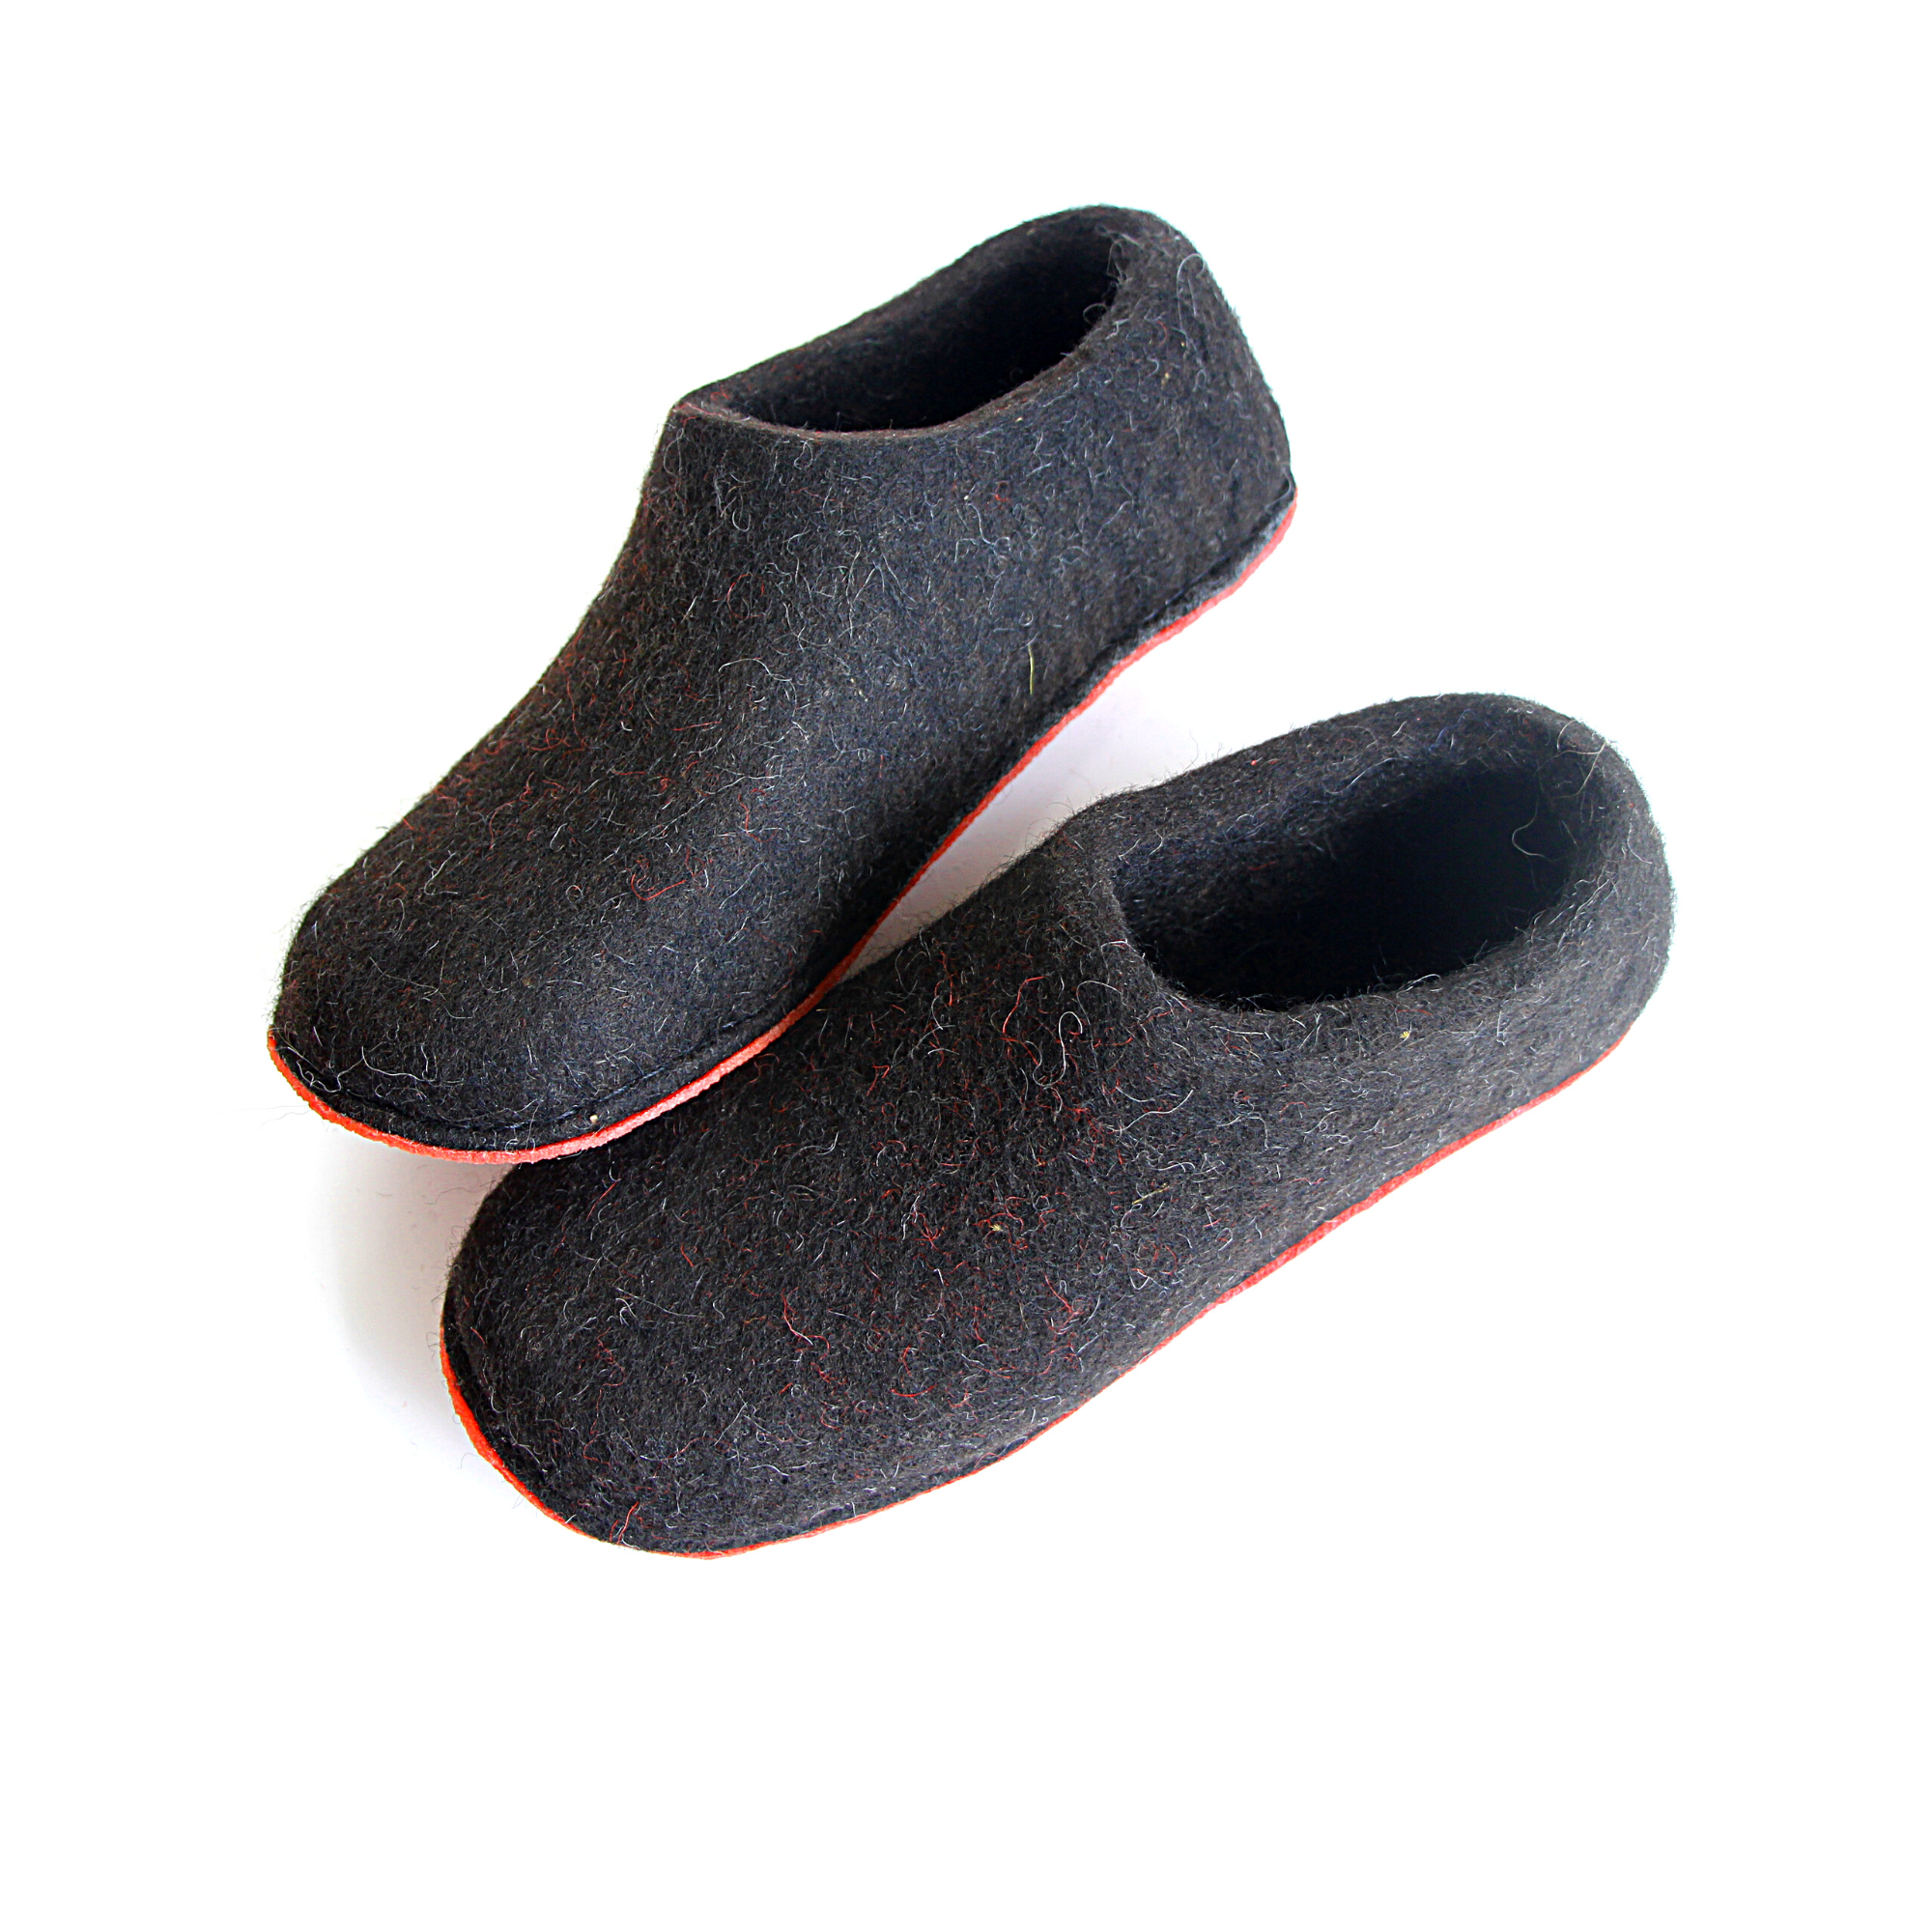 Slippers for everyone. | UK Stock, Shipped from Cornwall - SlipperShop